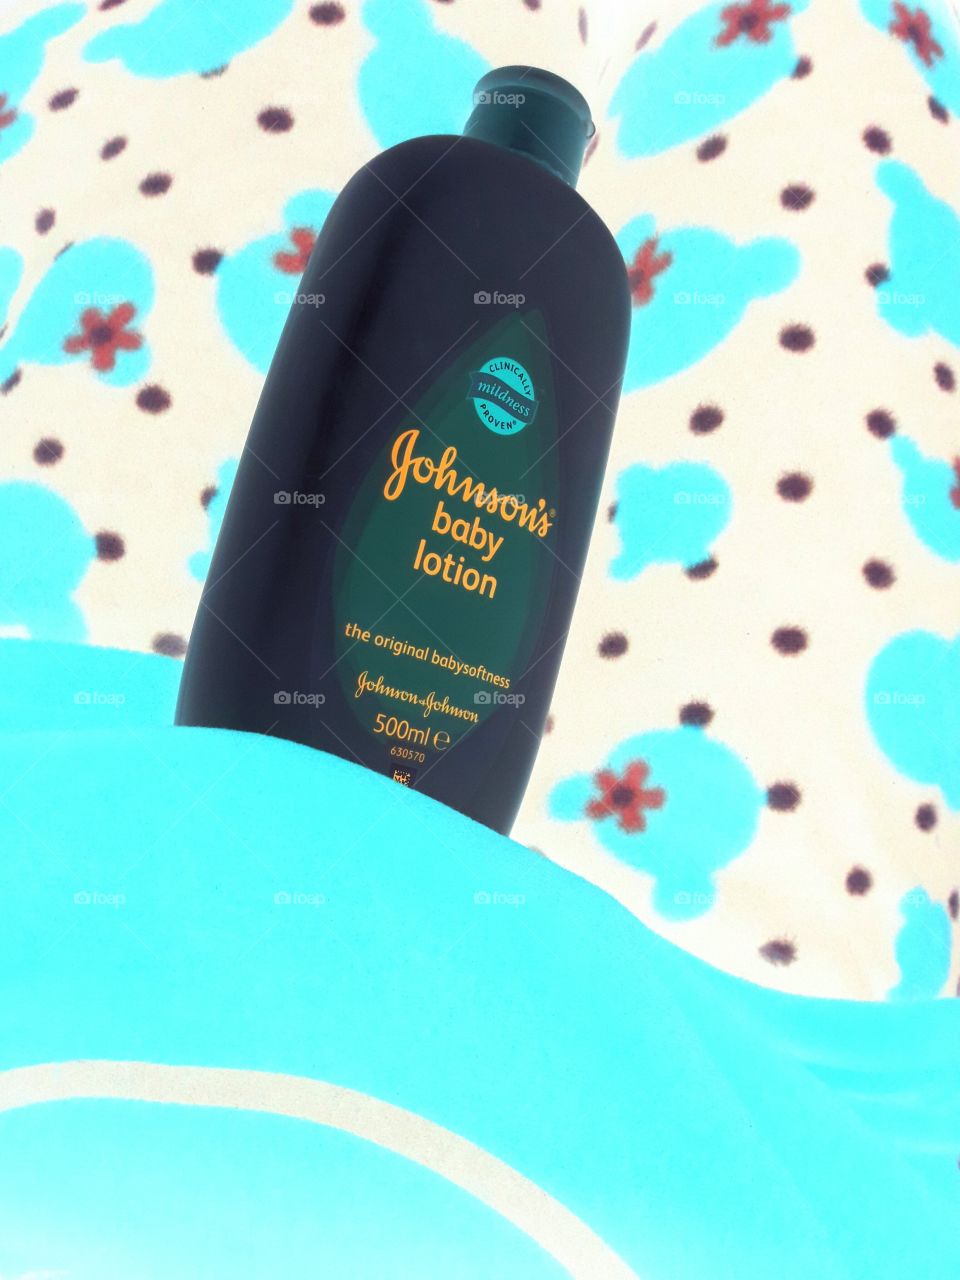 Johnson's baby lotion.. the magic portion to keep your baby's skin very nice 😉